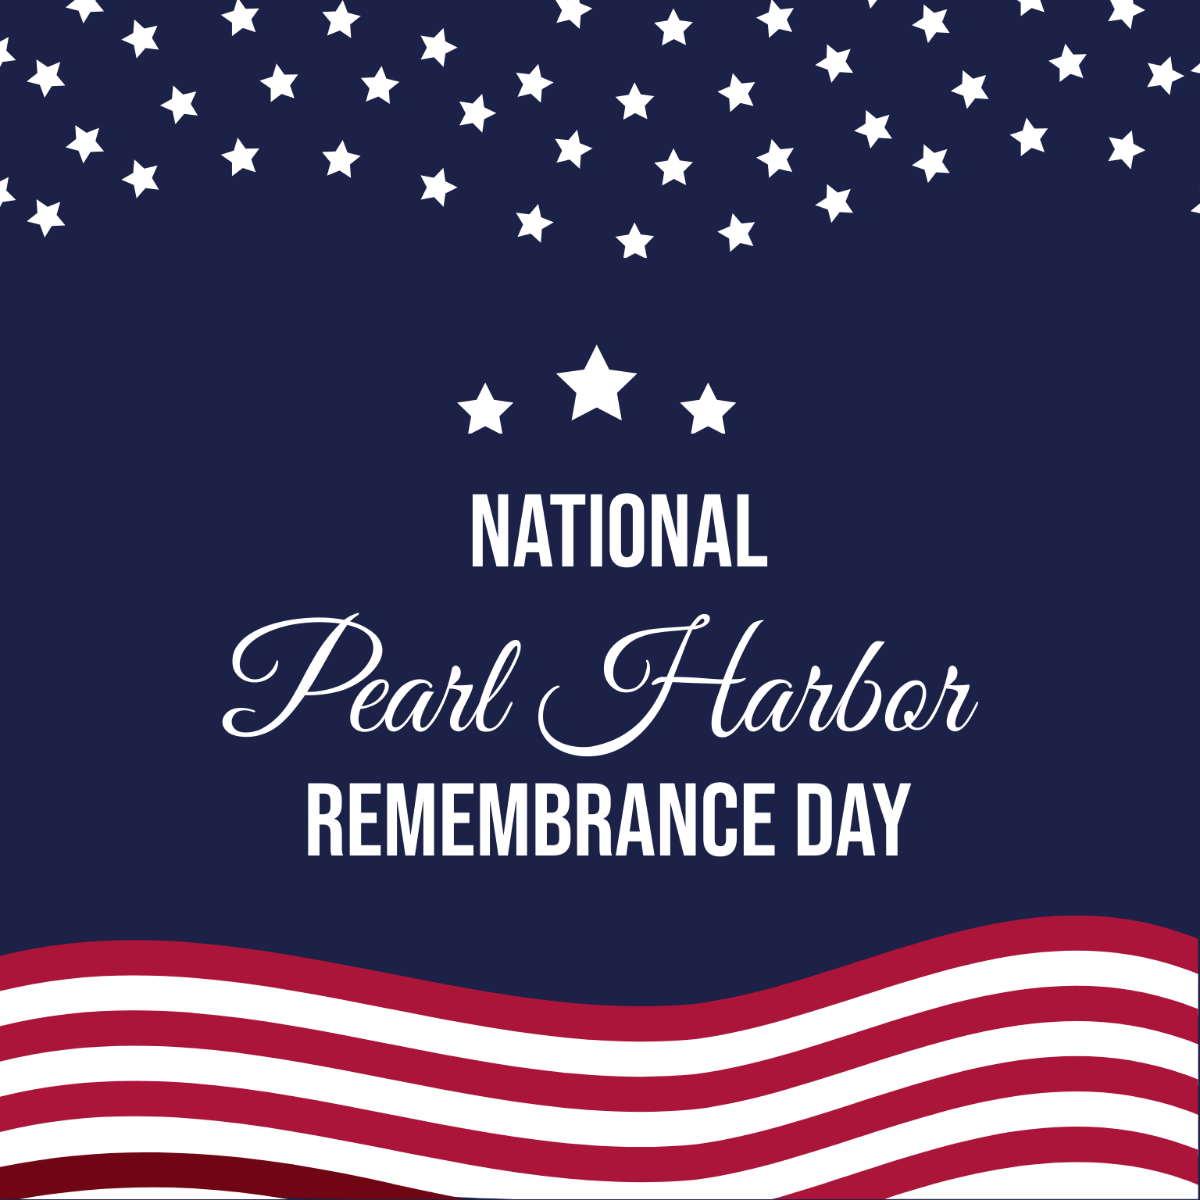 National Pearl Harbor Remembrance Day Vector